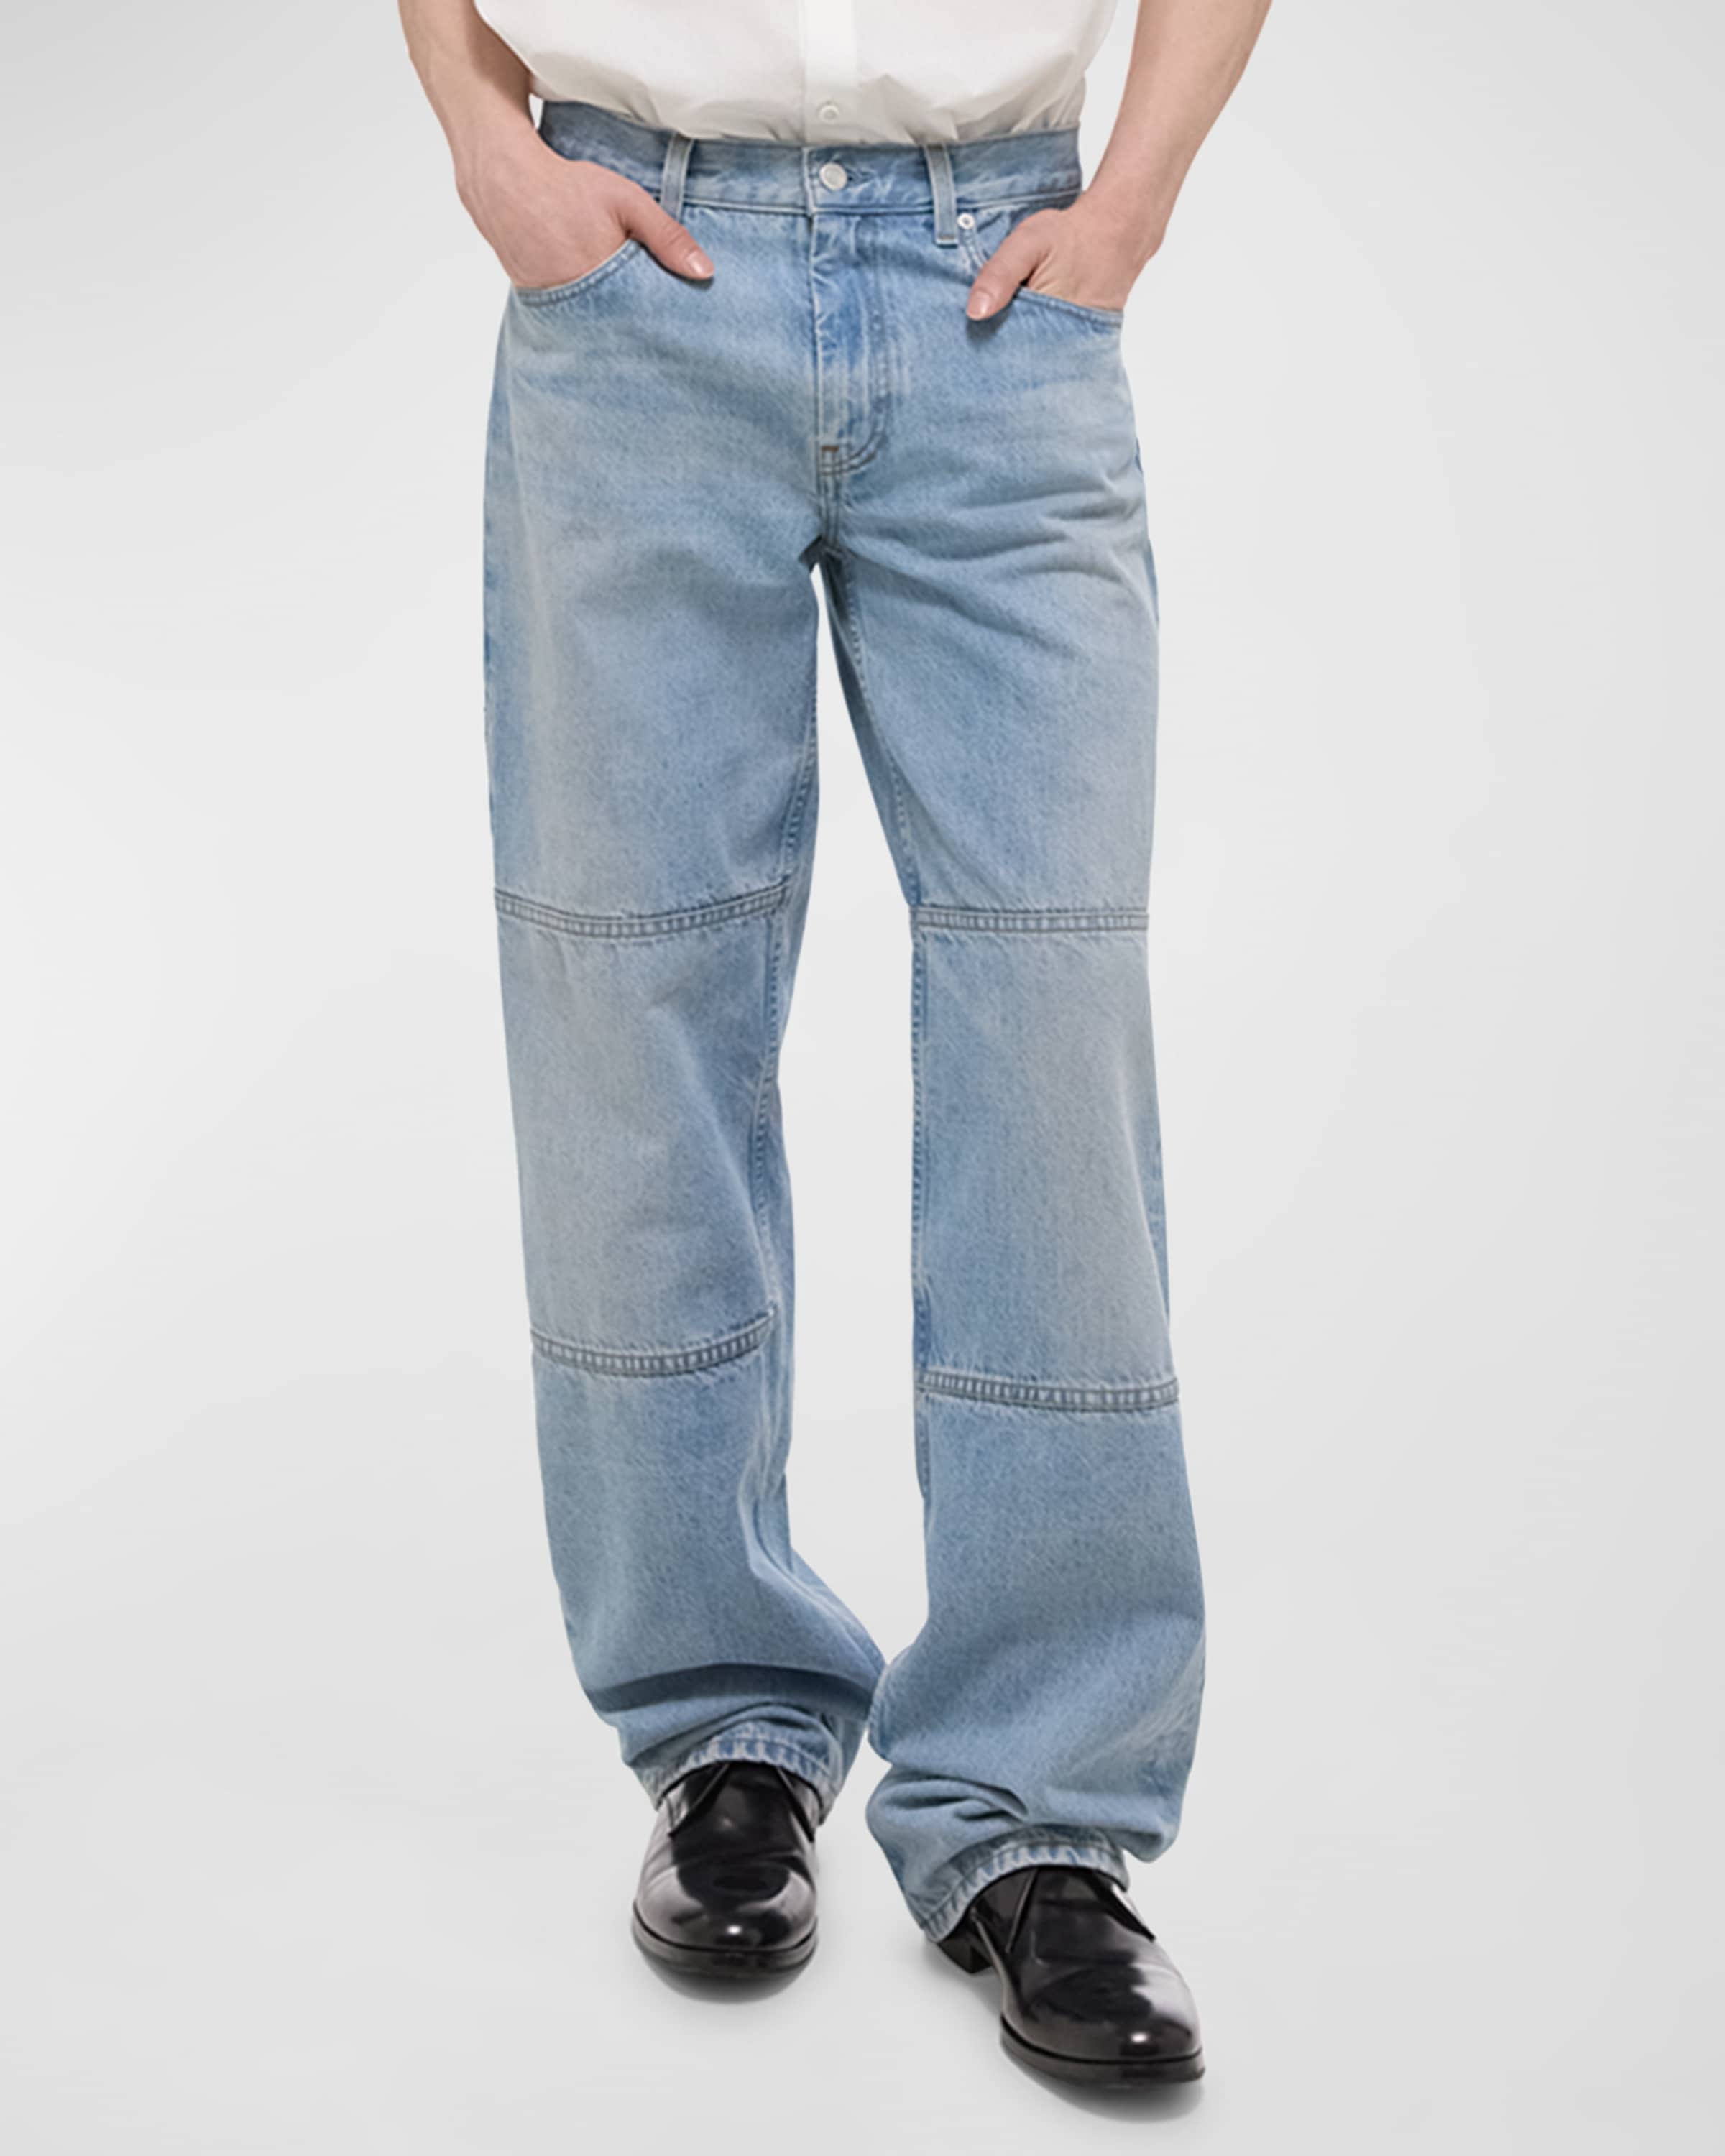 Men's Relaxed-Fit Carpenter Jeans - 1